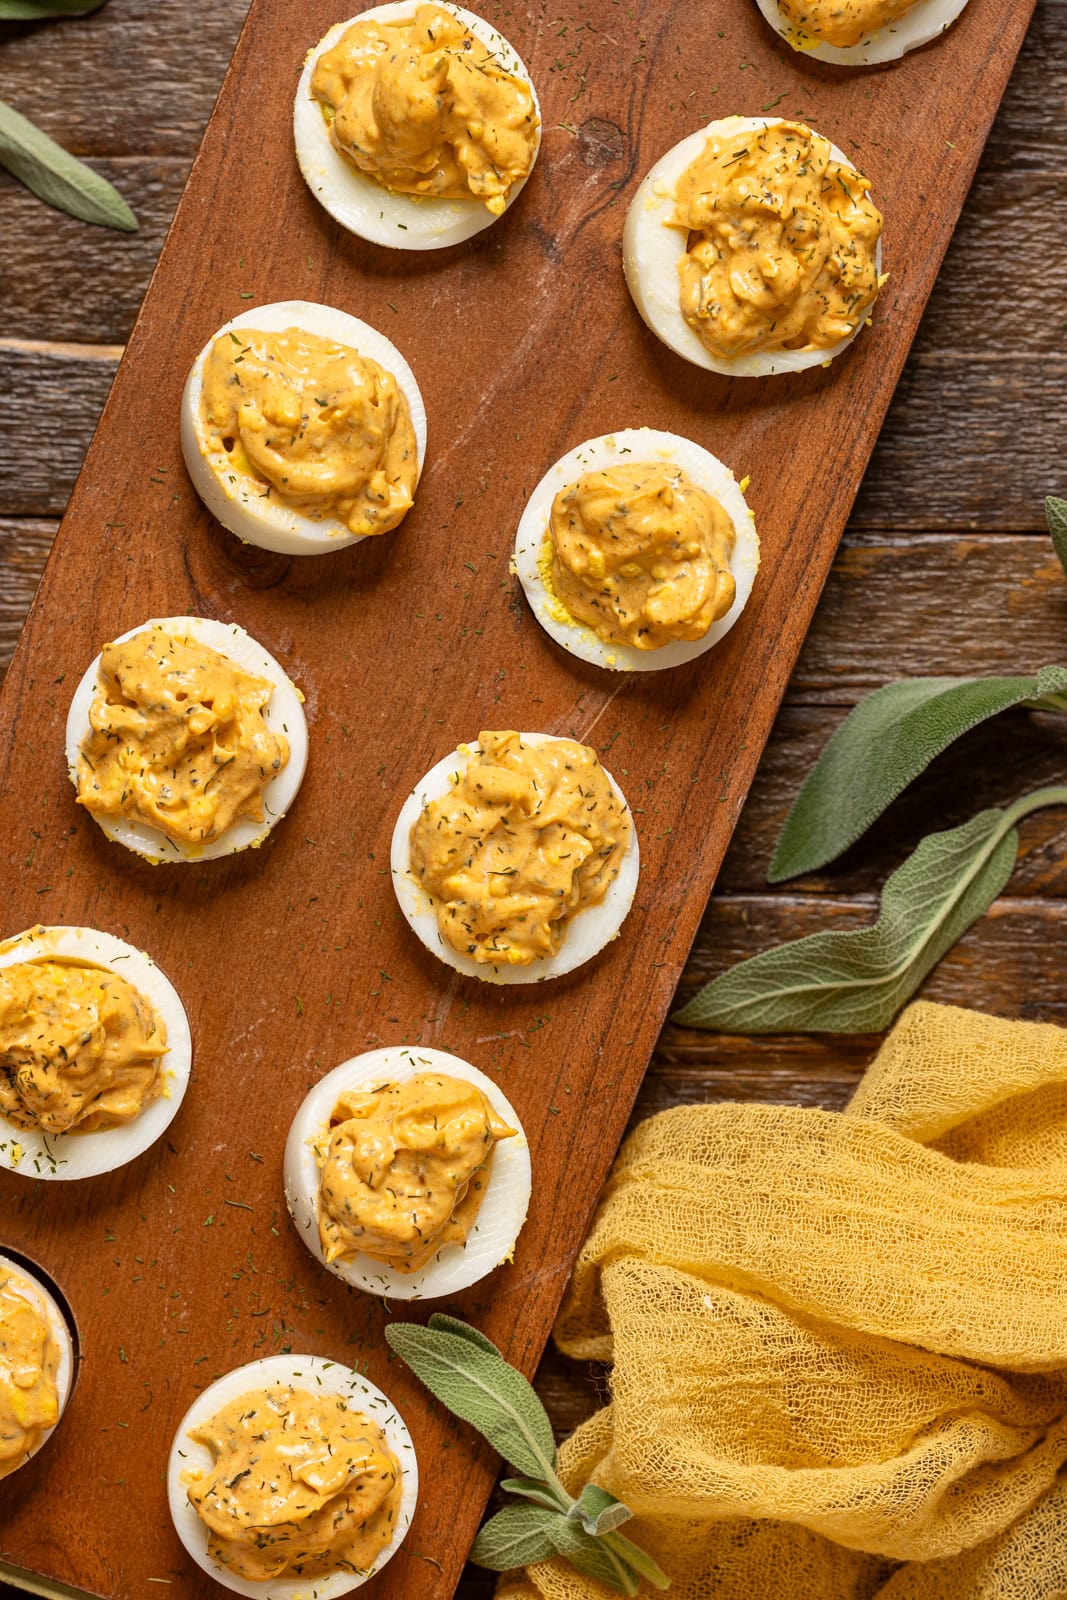 Image of deviled eggs on a wooden tray with sage leaves.